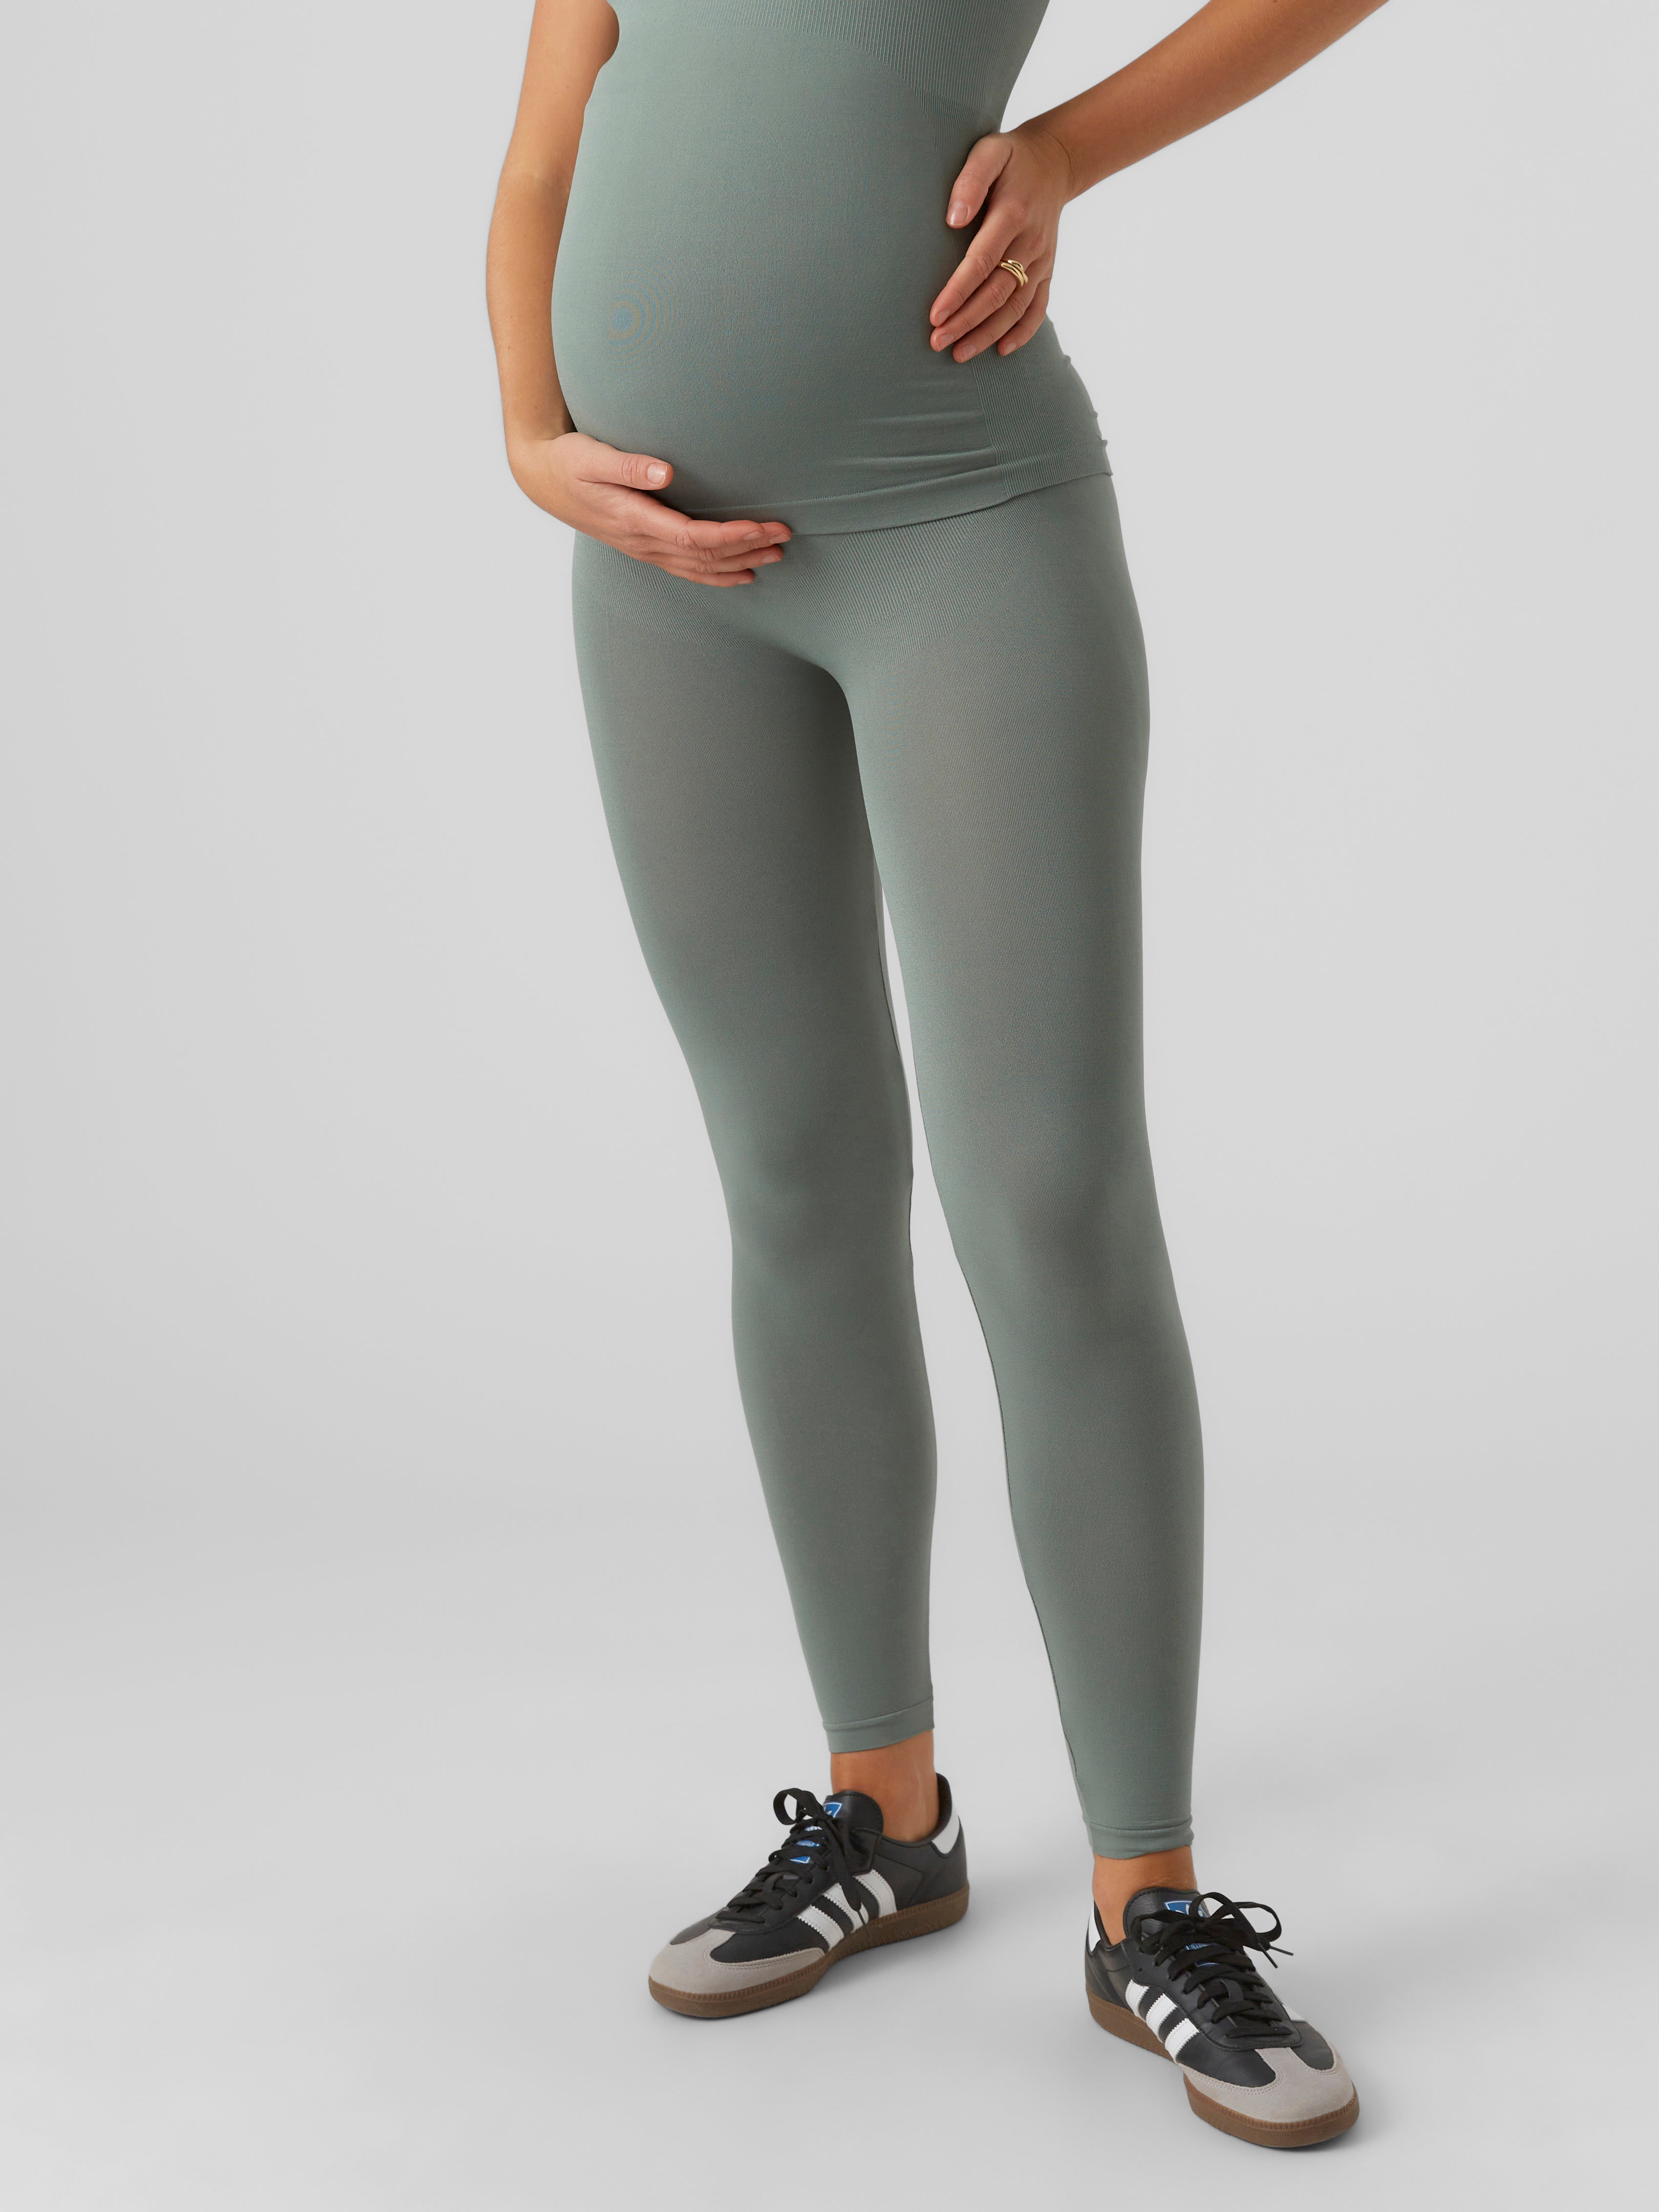 Maternity Beyond The Bump Leggings & Tops - clothing & accessories - by  owner - apparel sale - craigslist